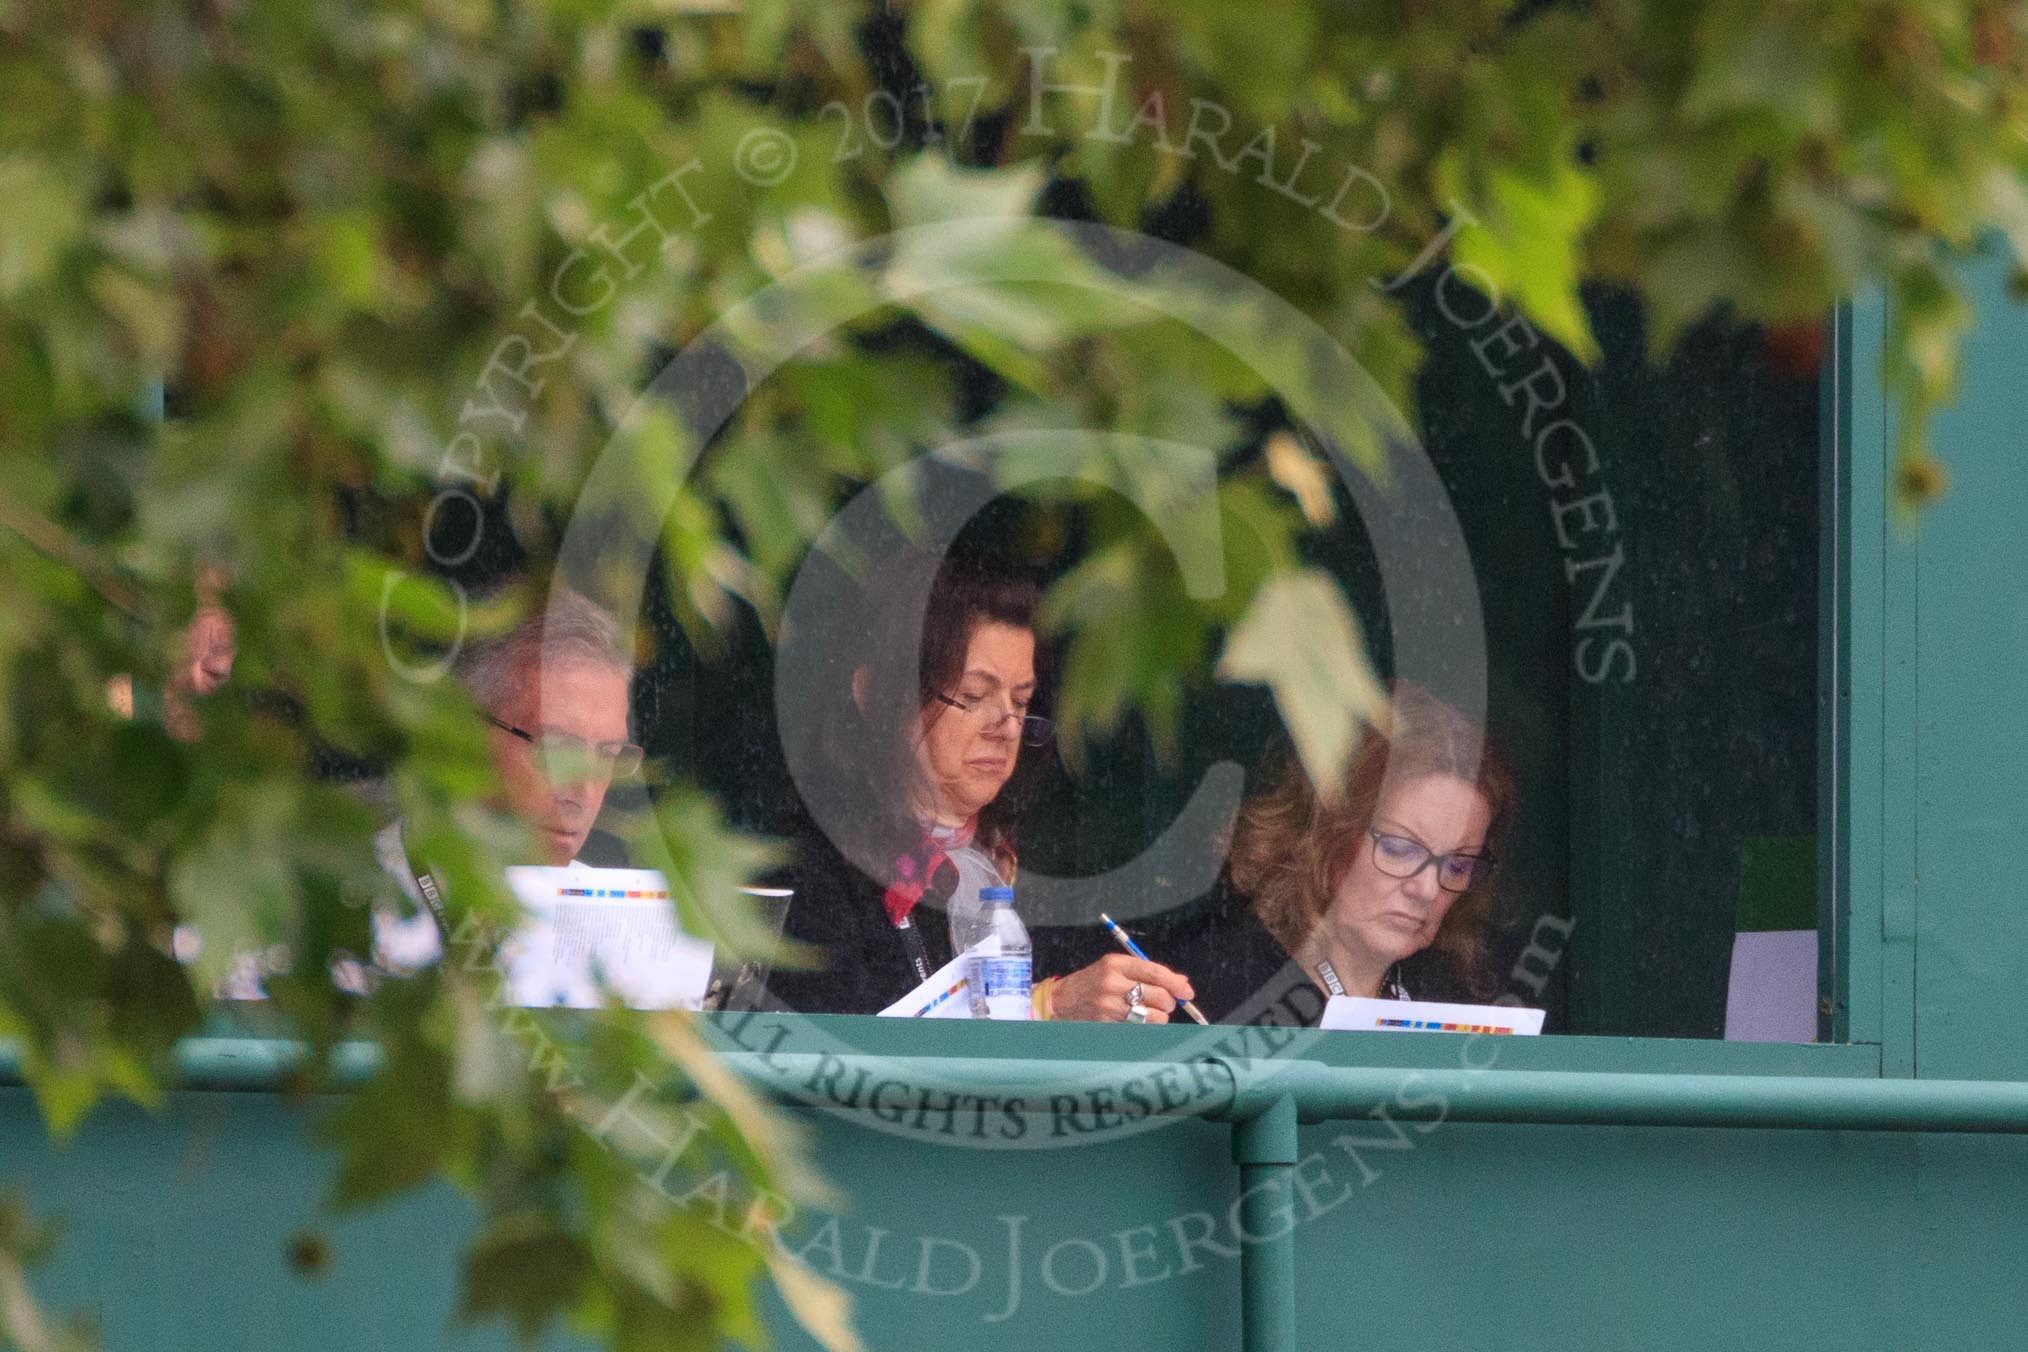 during The Colonel's Review {iptcyear4} (final rehearsal for Trooping the Colour, The Queen's Birthday Parade)  at Horse Guards Parade, Westminster, London, 2 June 2018, 10:44.